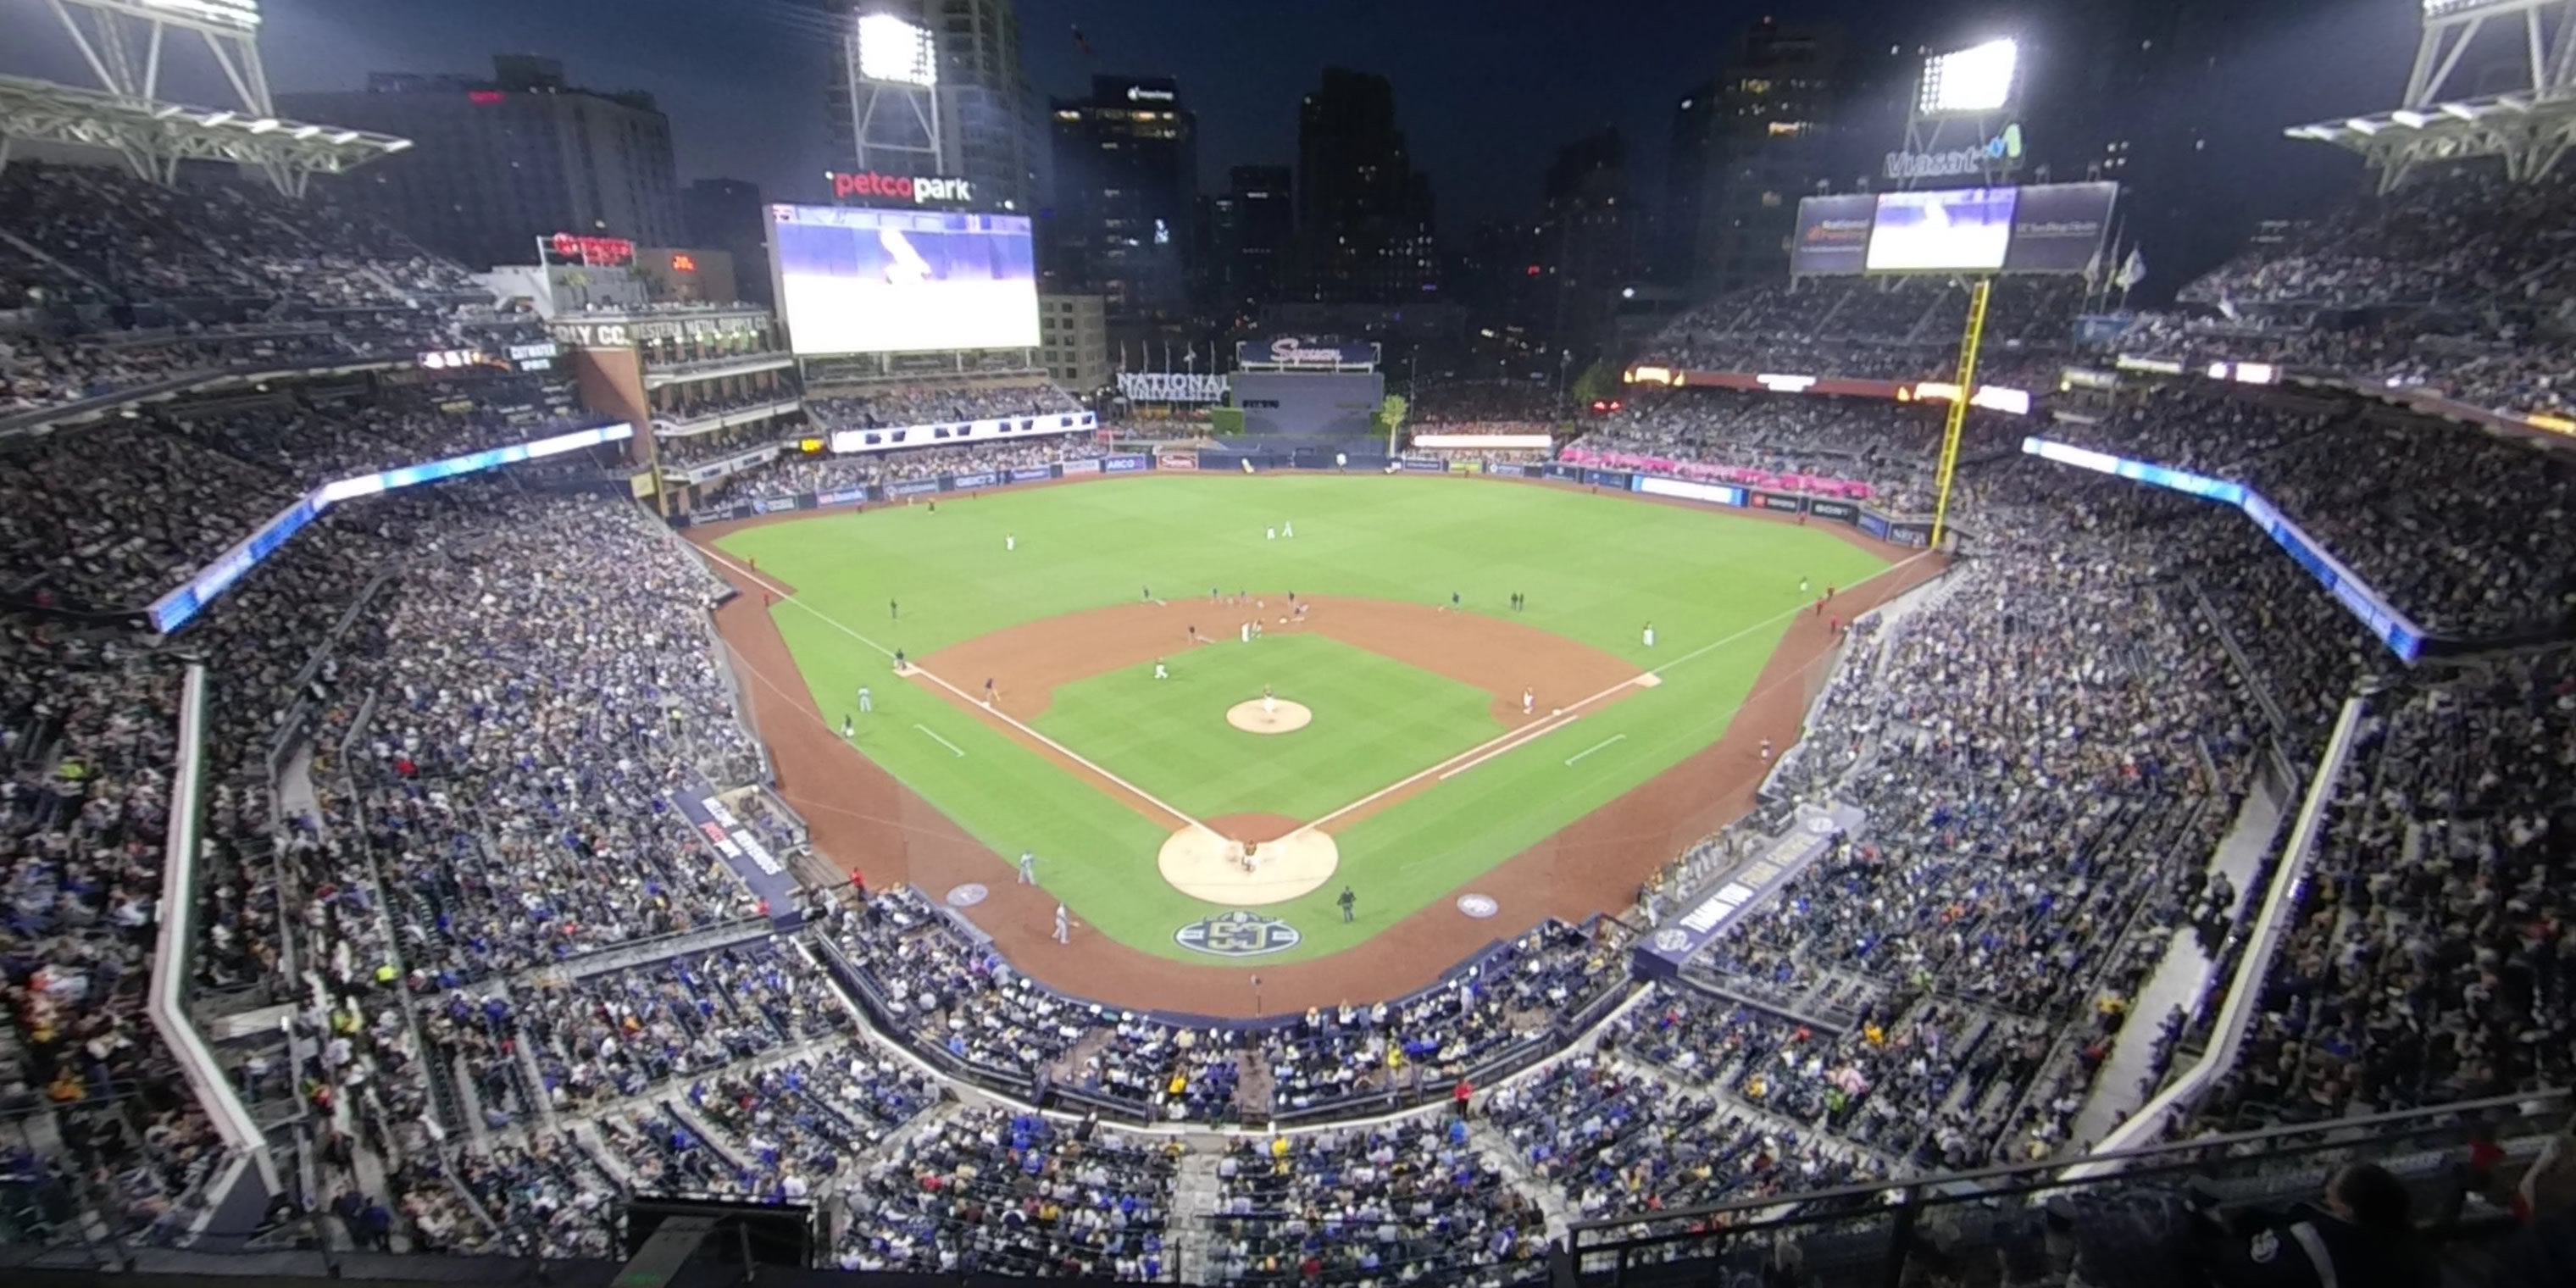 section 301 panoramic seat view  for baseball - petco park